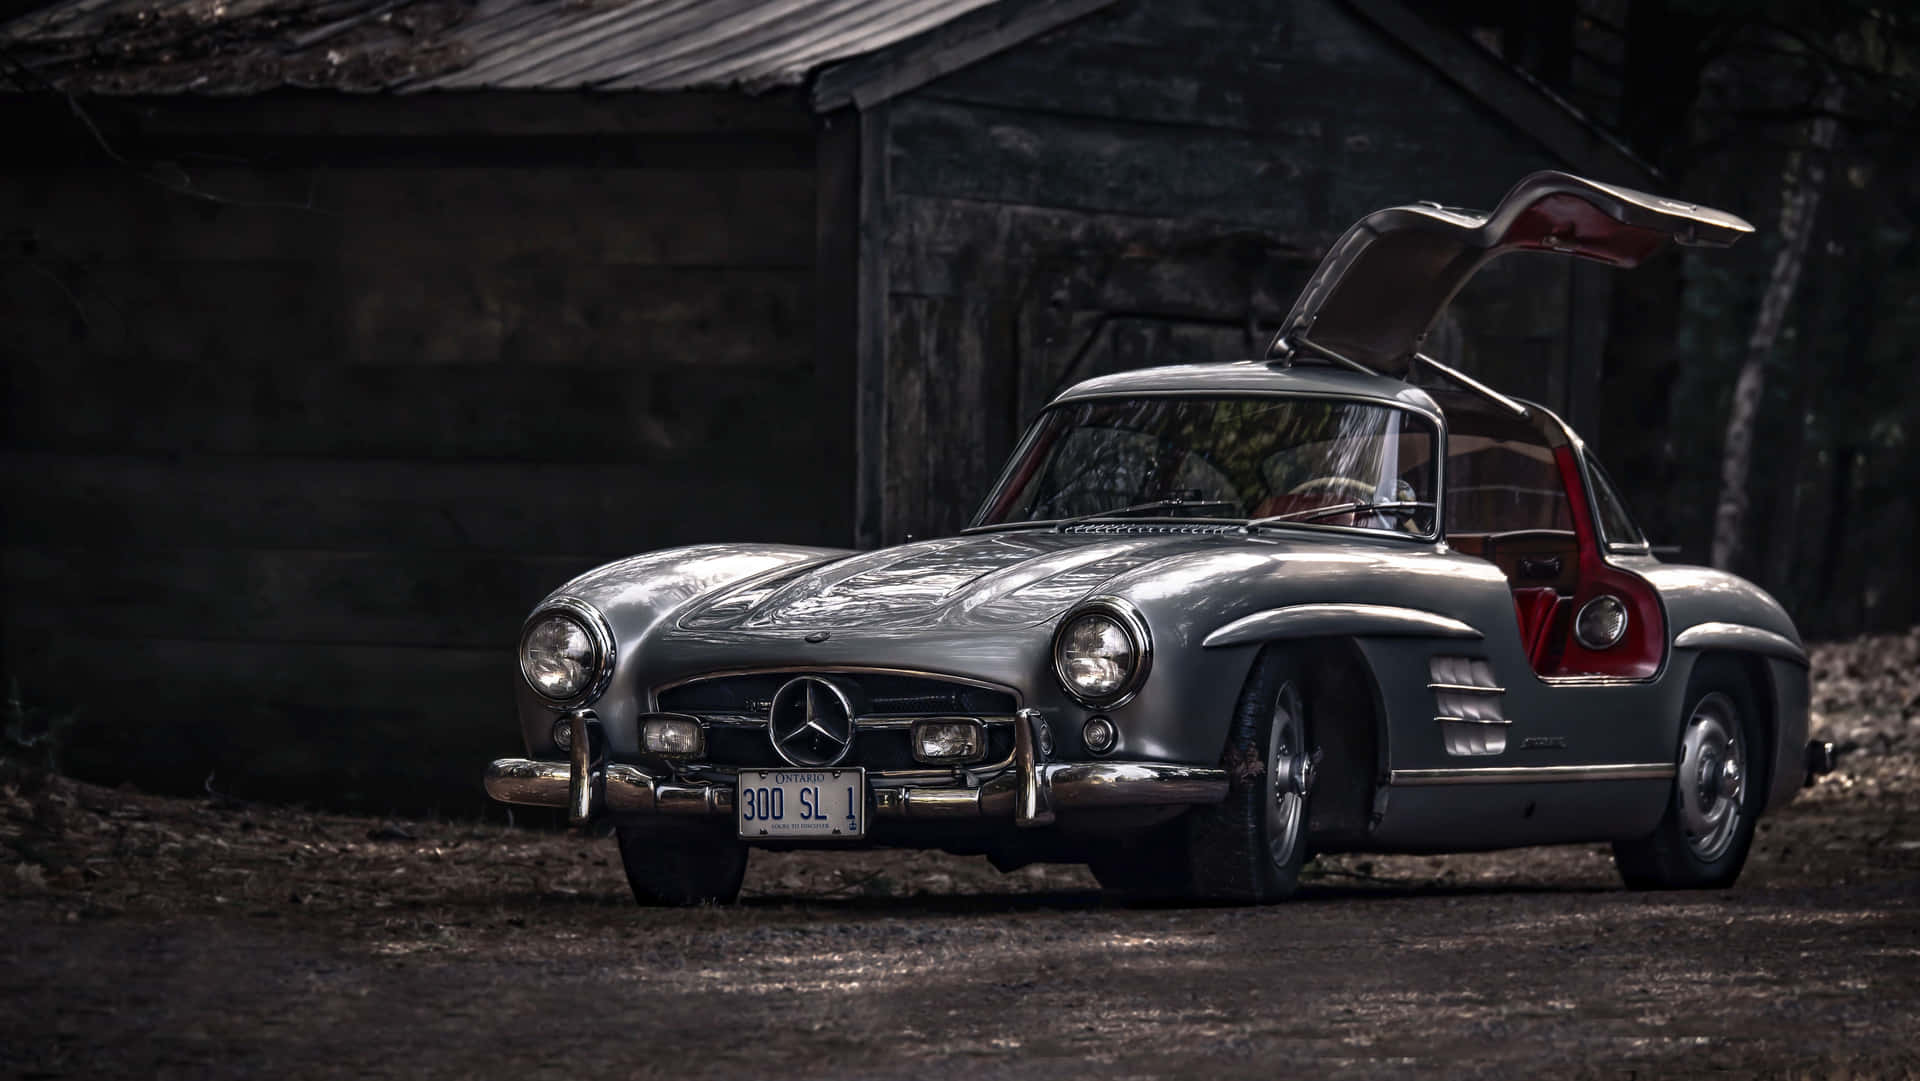 Caption: Vintage Elegance with the Old Mercedes-Benz Gullwing. Wallpaper